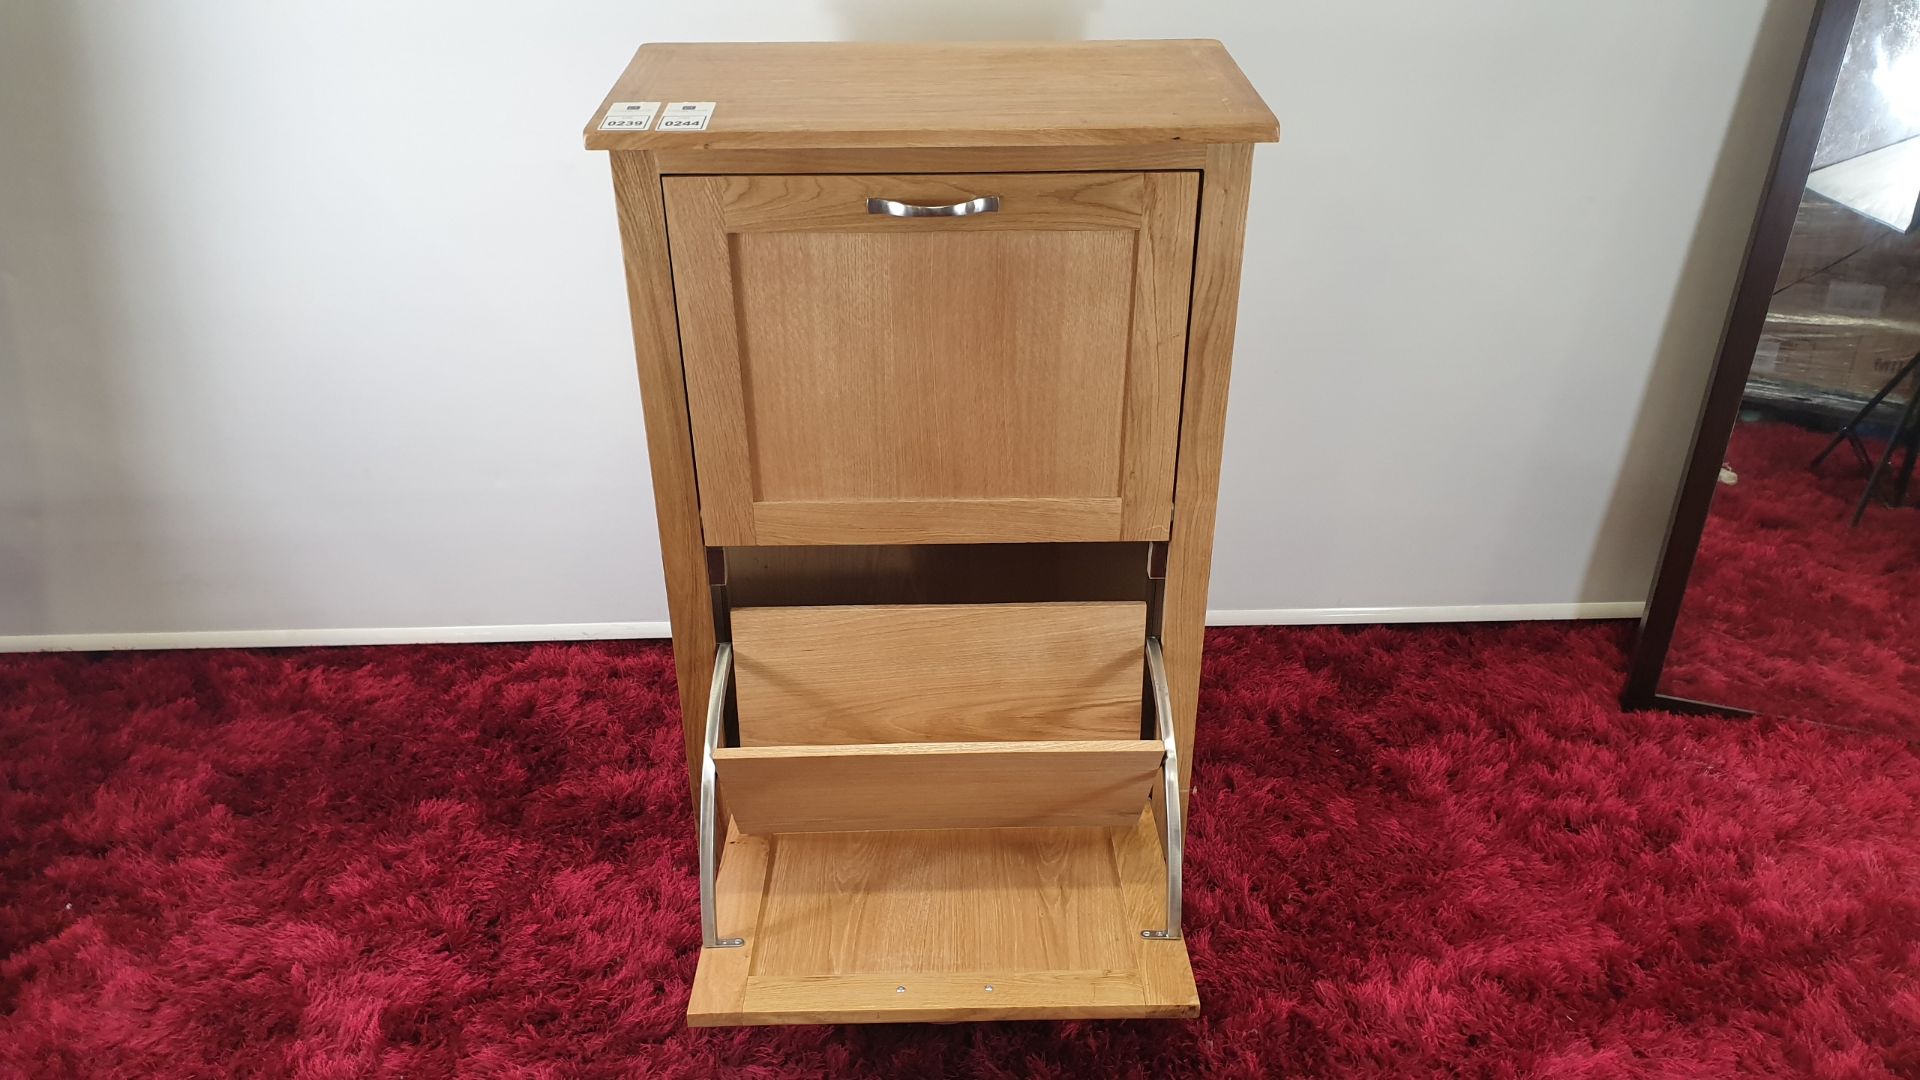 LIGHT OAK COLOURED SHOE CUPBOARD UNIT - BRAND NEW AND BOXED